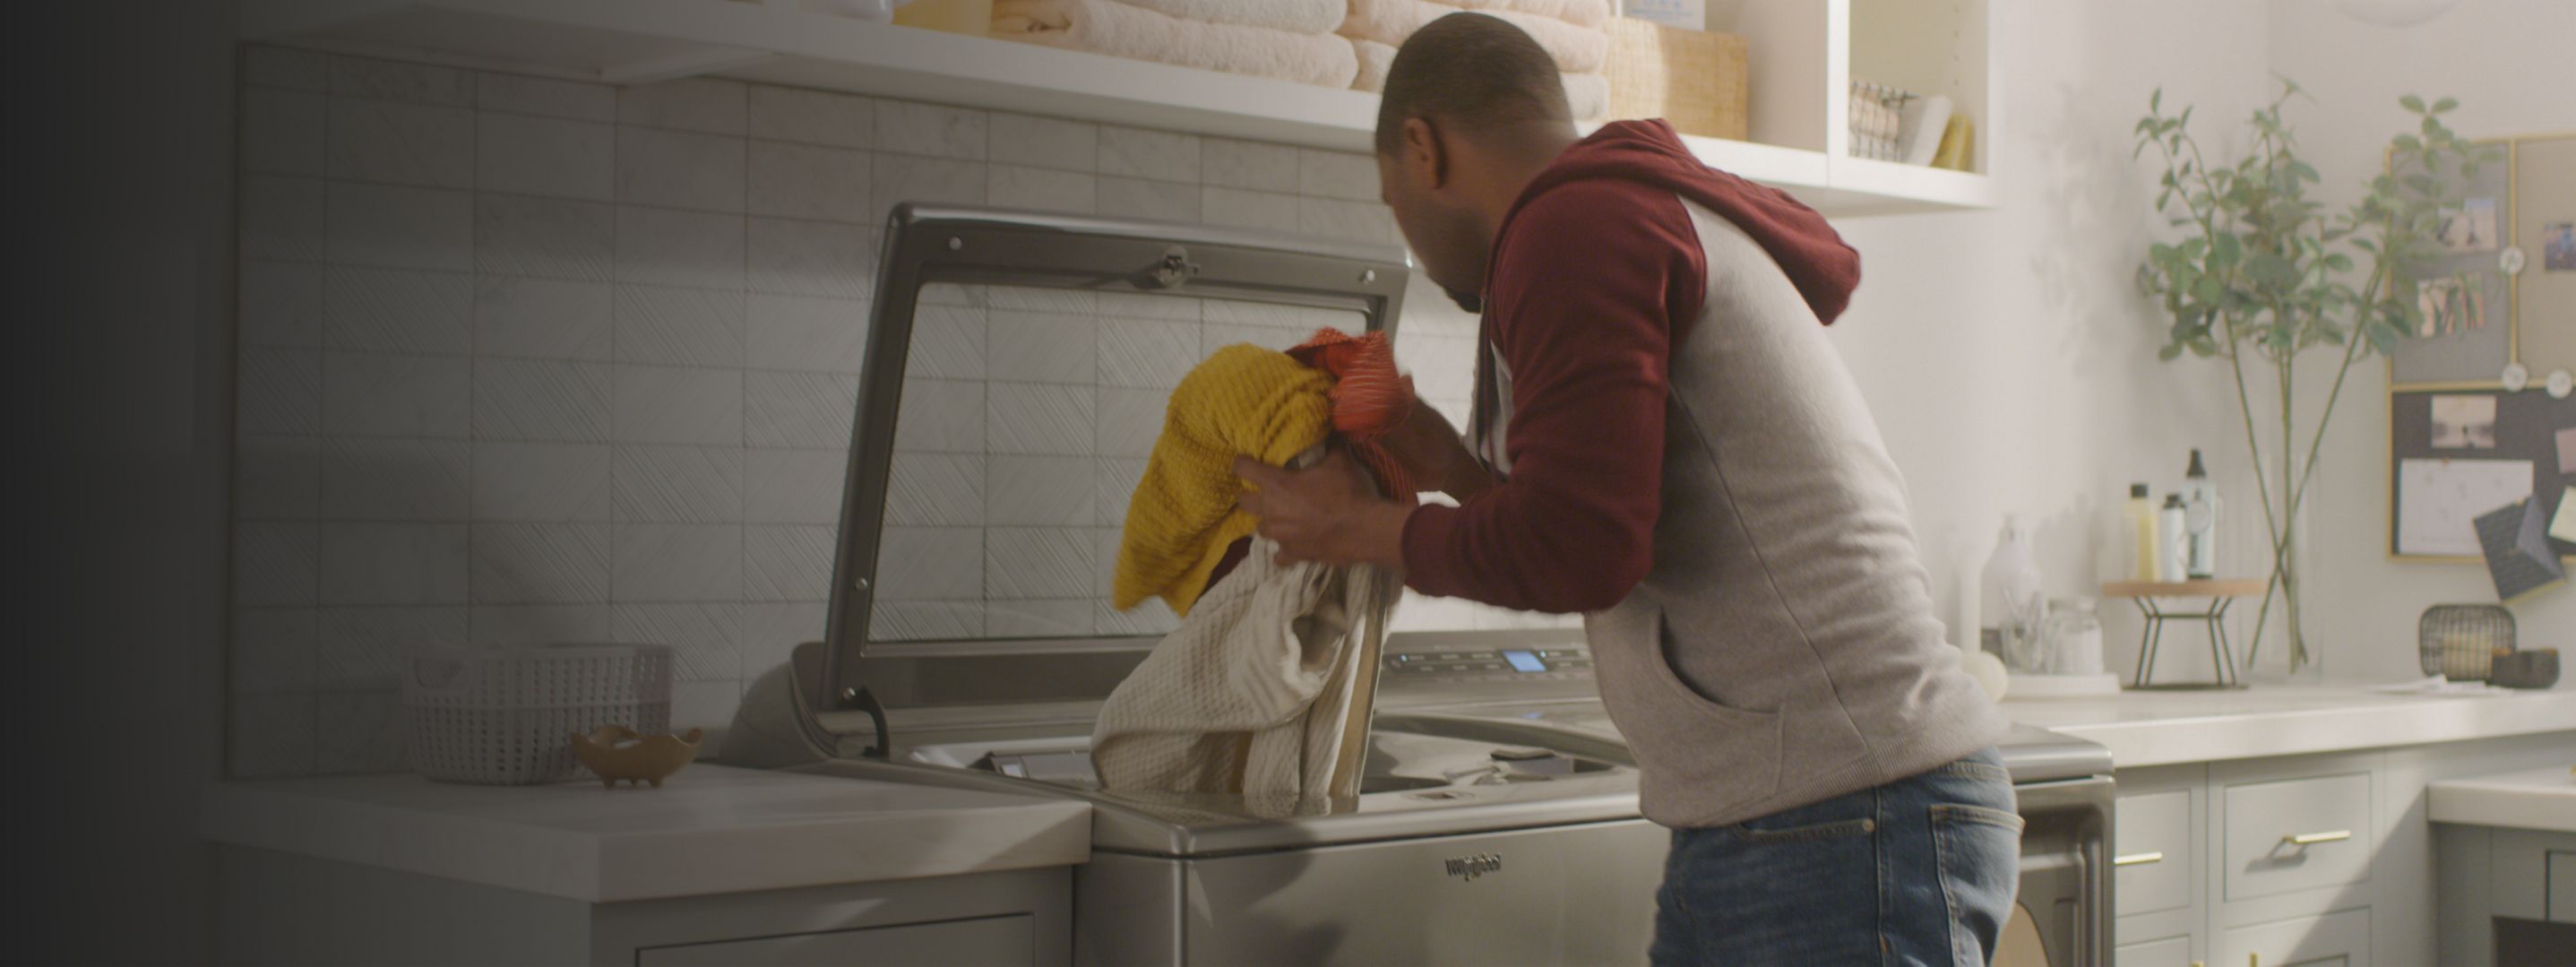 Doing the laundry with a Whirlpool® front load laundry pair.